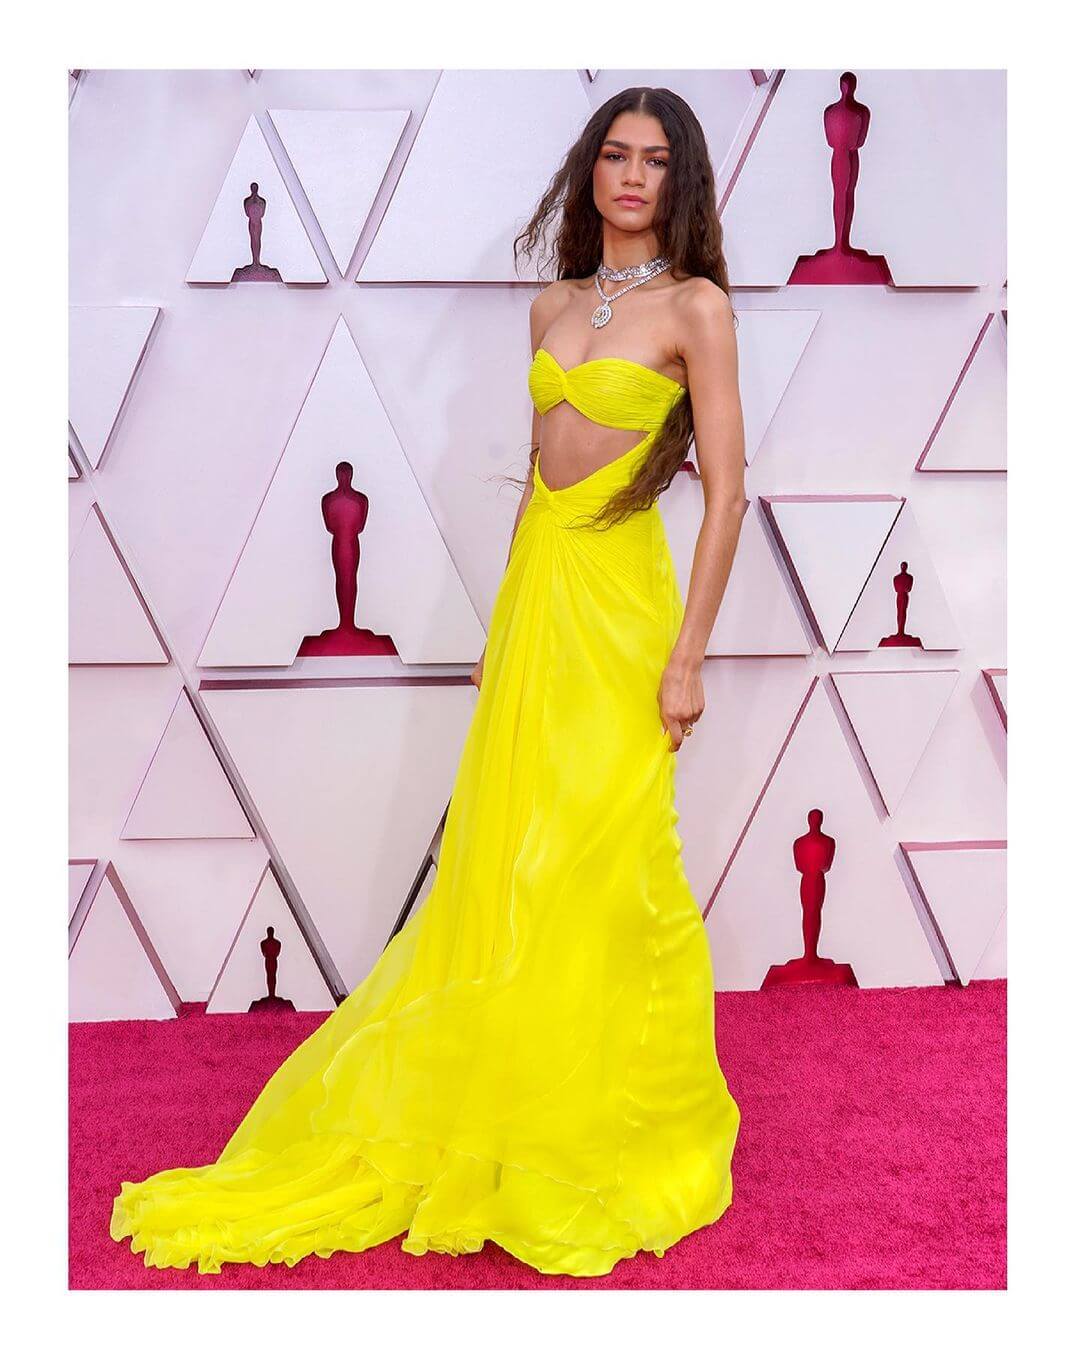 Dress Like The Most Fashionable Celebrities Don't Shy Away From Bright Colors Like ZENDAYA